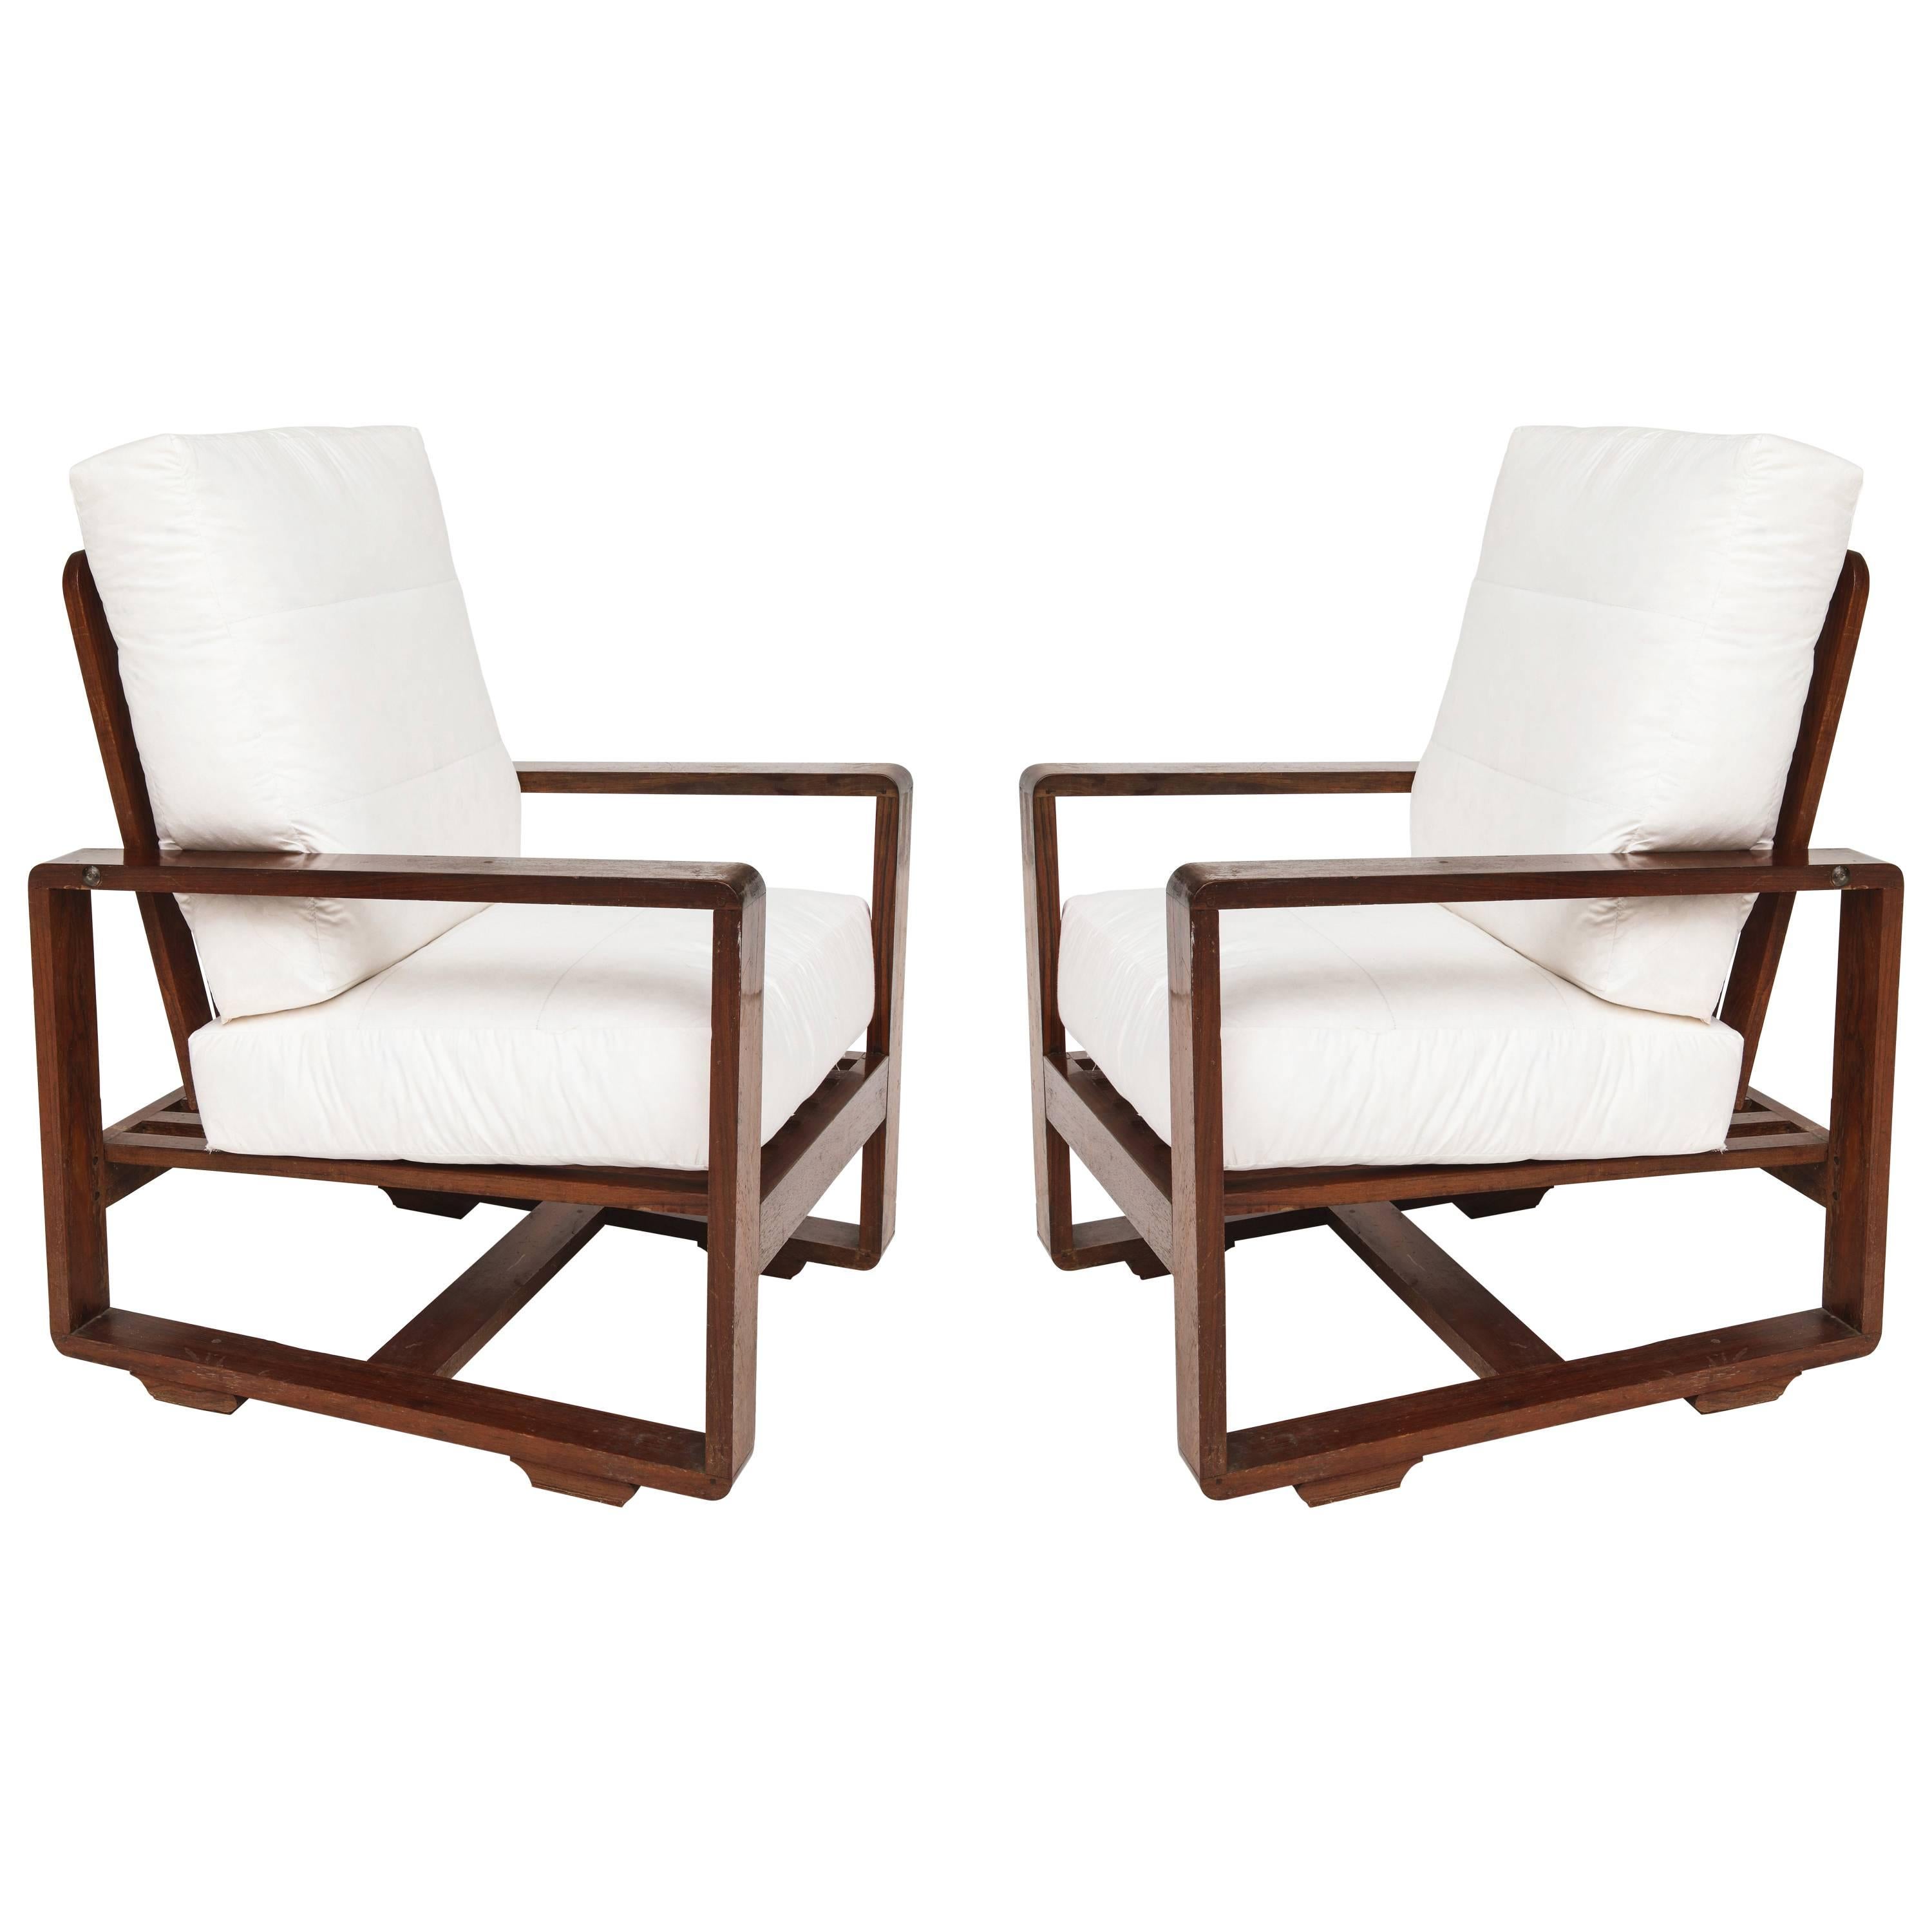 Sornay style deco rosewood lounge chairs, France 1930s-1940s mid-century

Incredible rosewood chairs with beautiful Patina throughout. Modernist square arms and tilting back. In lovely original condition.
Price is per chair 4 available.

Measures: